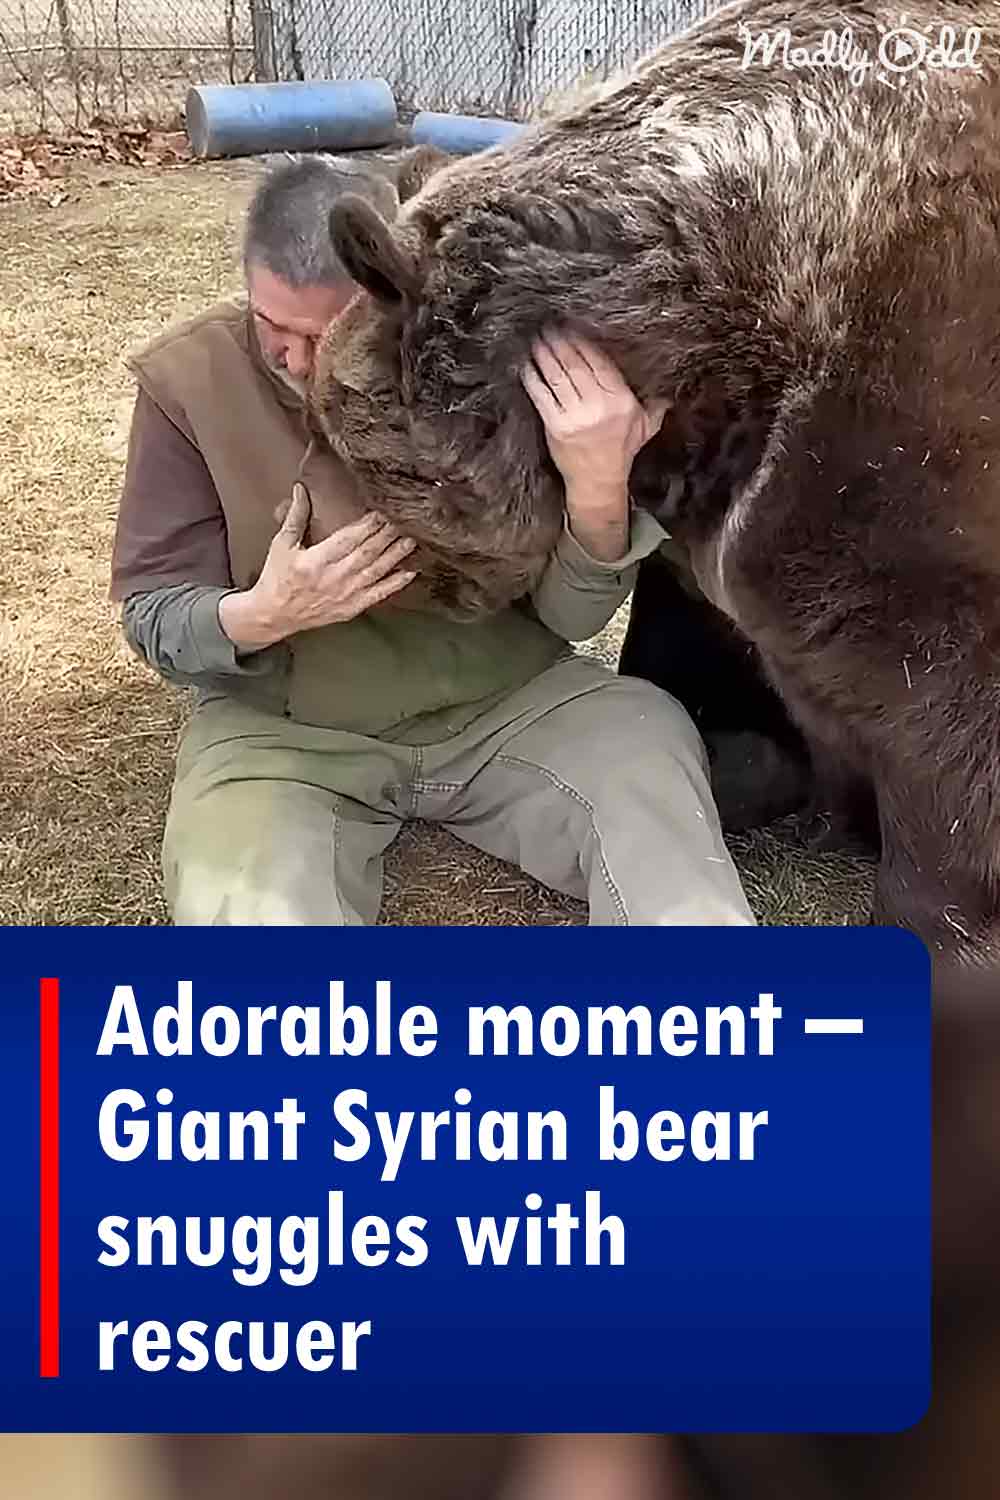 Adorable moment - Giant Syrian bear snuggles with rescuer